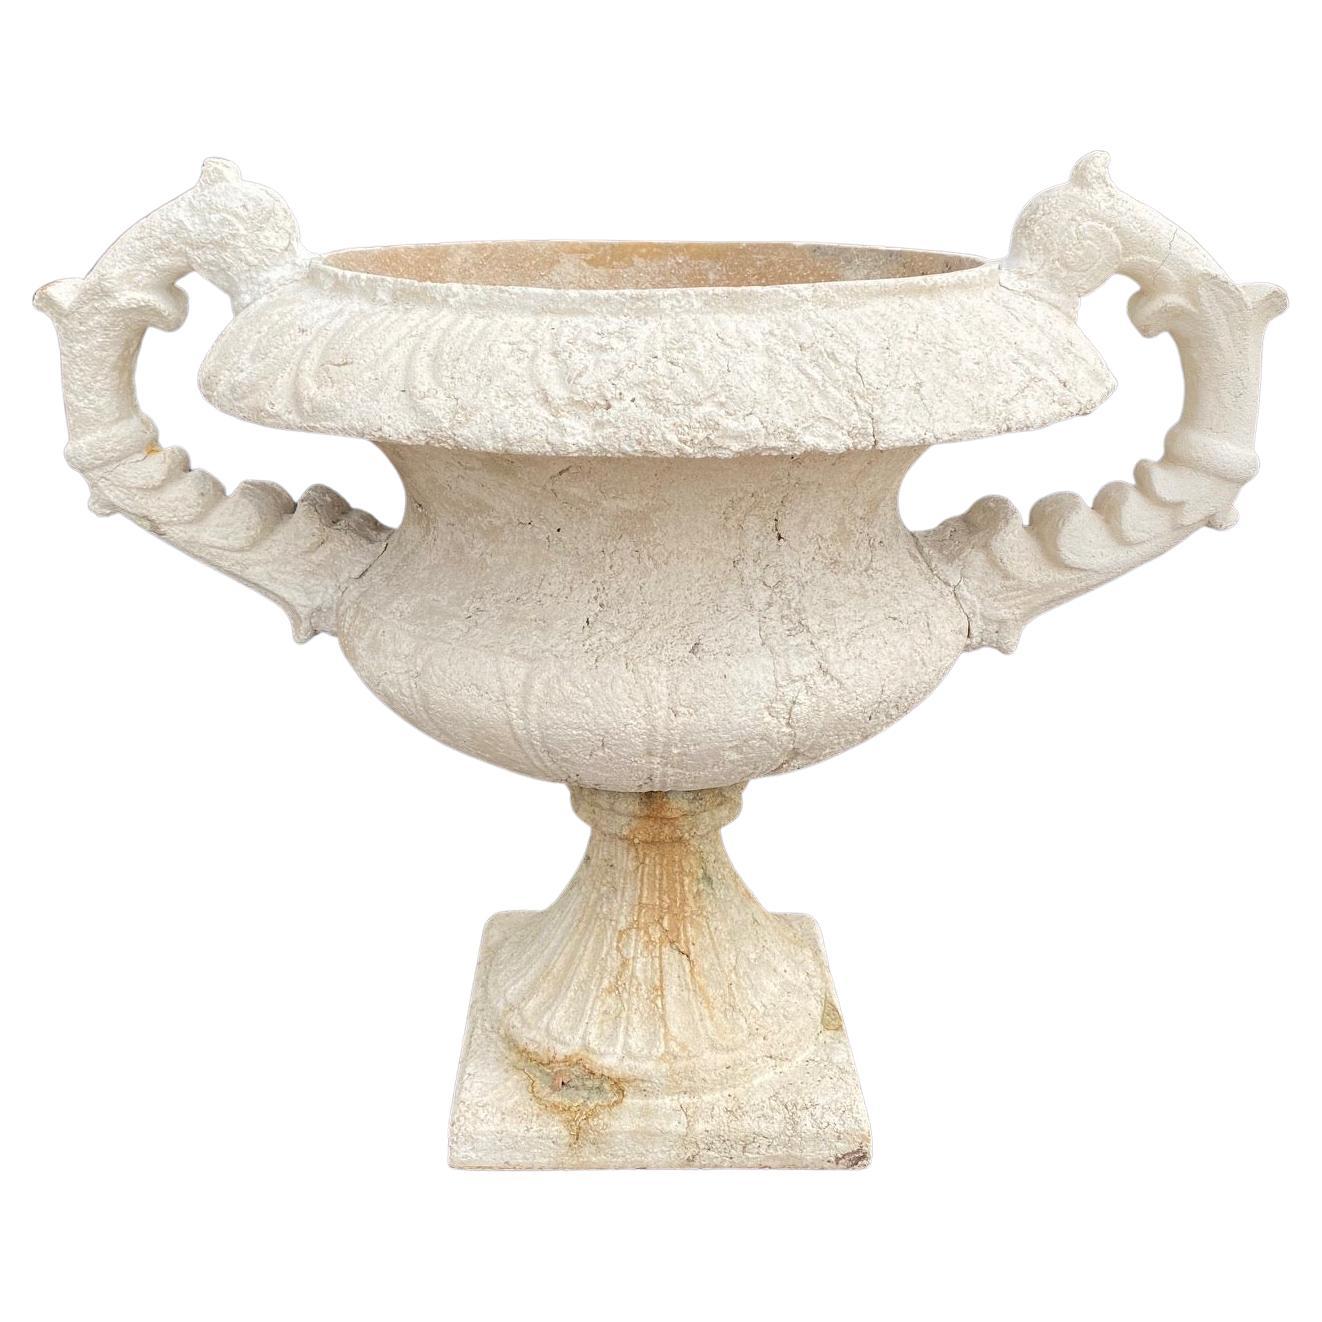 Large Romantic Neoclassical Style Stone Resin Garden Urn 